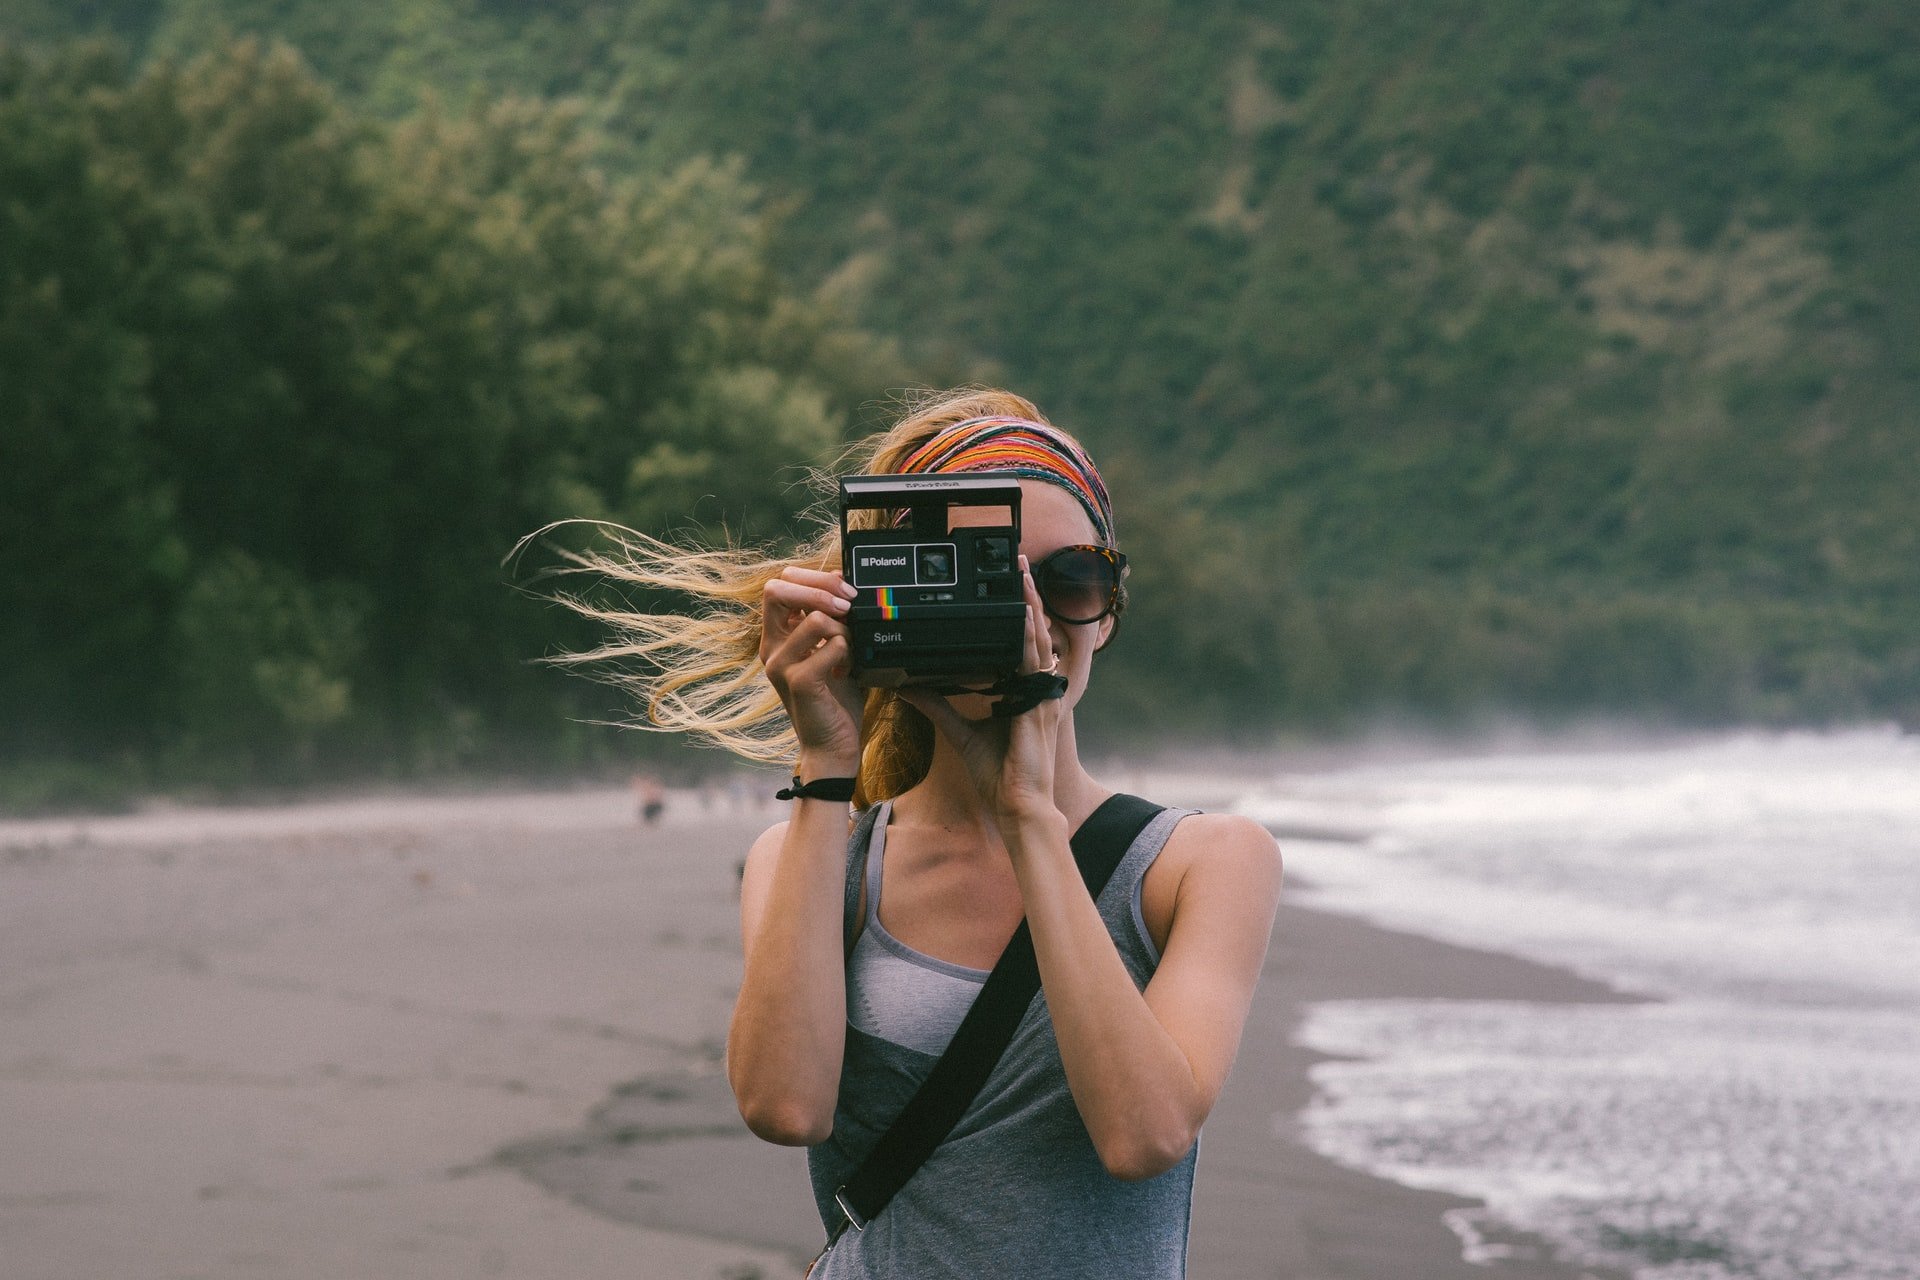 Photographer standing on a beach, trees in background, tide coming in, holding a Polaroid camera pointed at the viewer